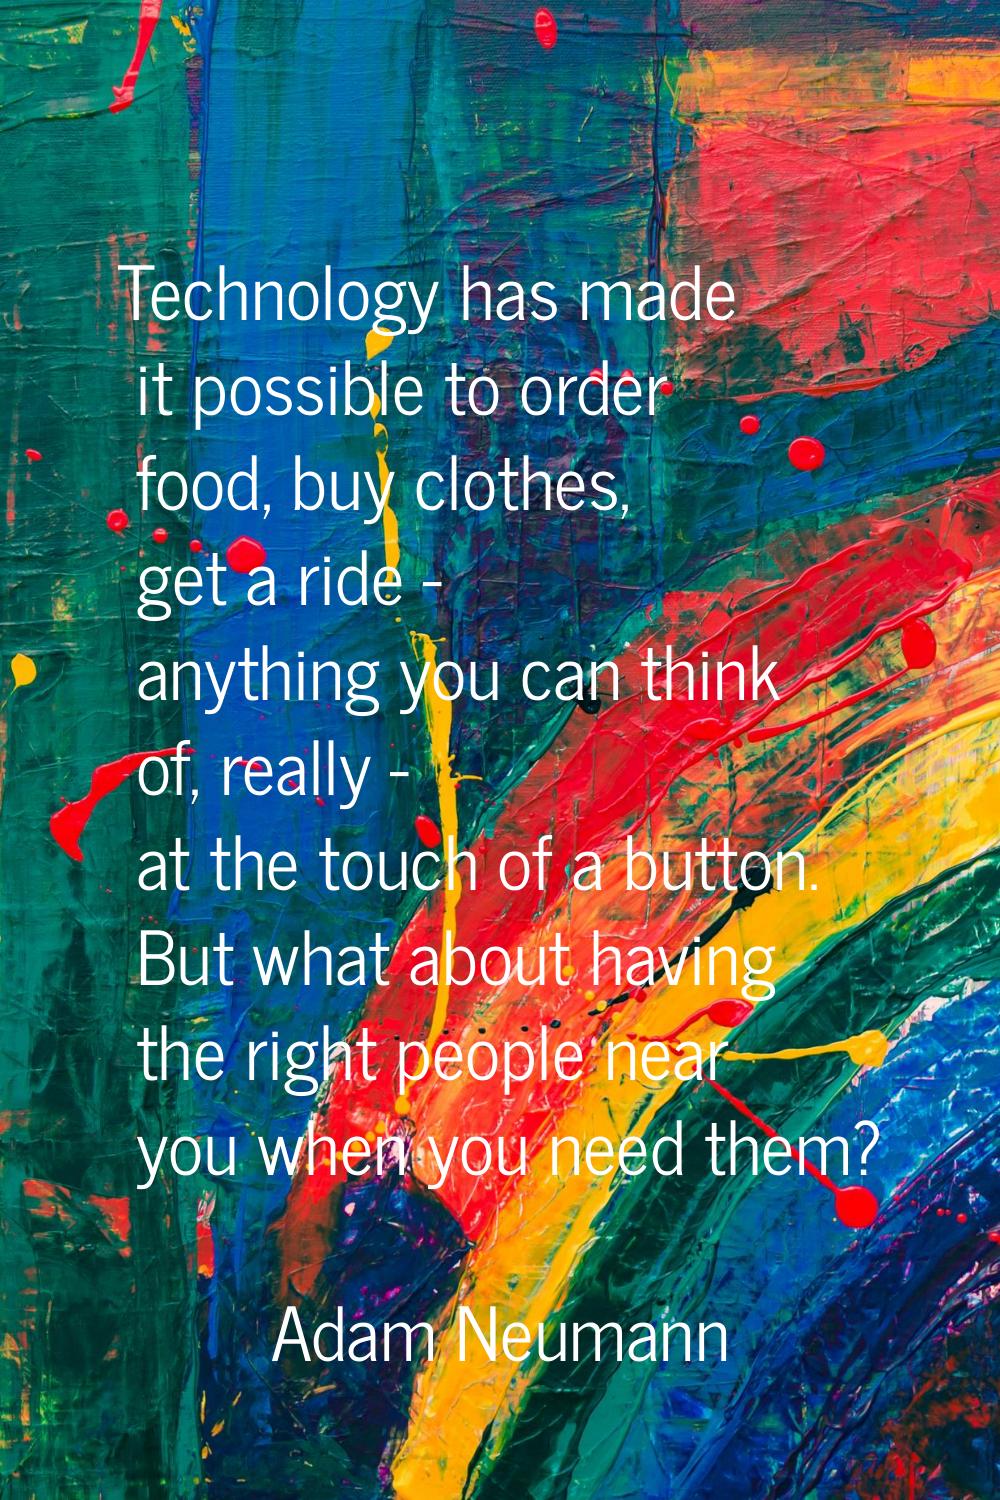 Technology has made it possible to order food, buy clothes, get a ride - anything you can think of,